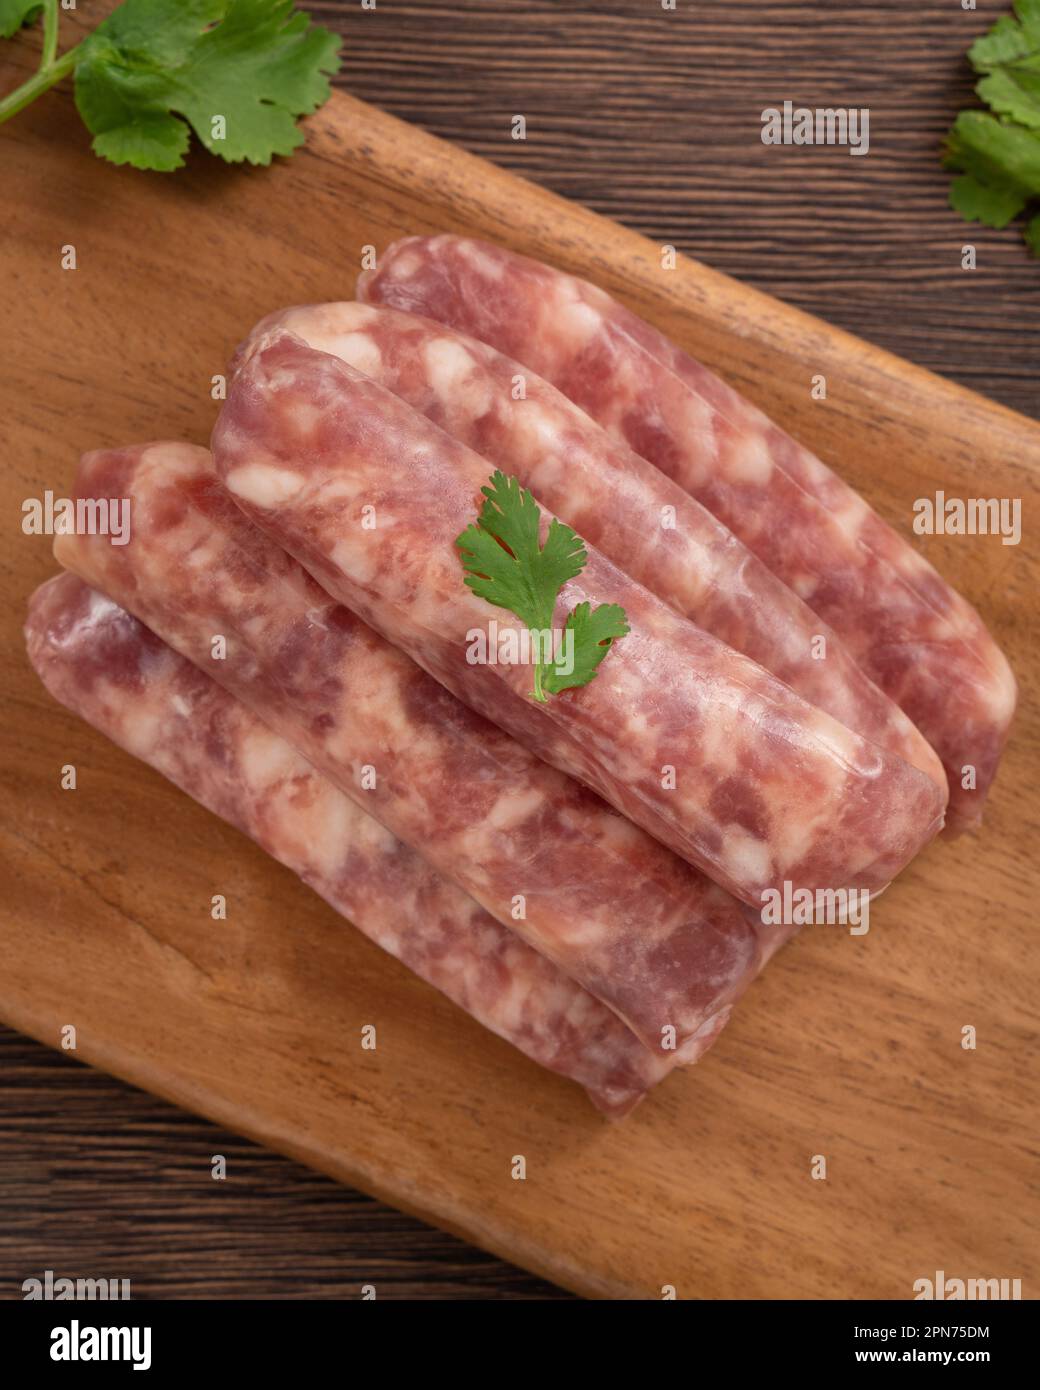 Raw Taiwanese sausage in garlic flavor with garlic cloves in a plate on wooden table background. Stock Photo